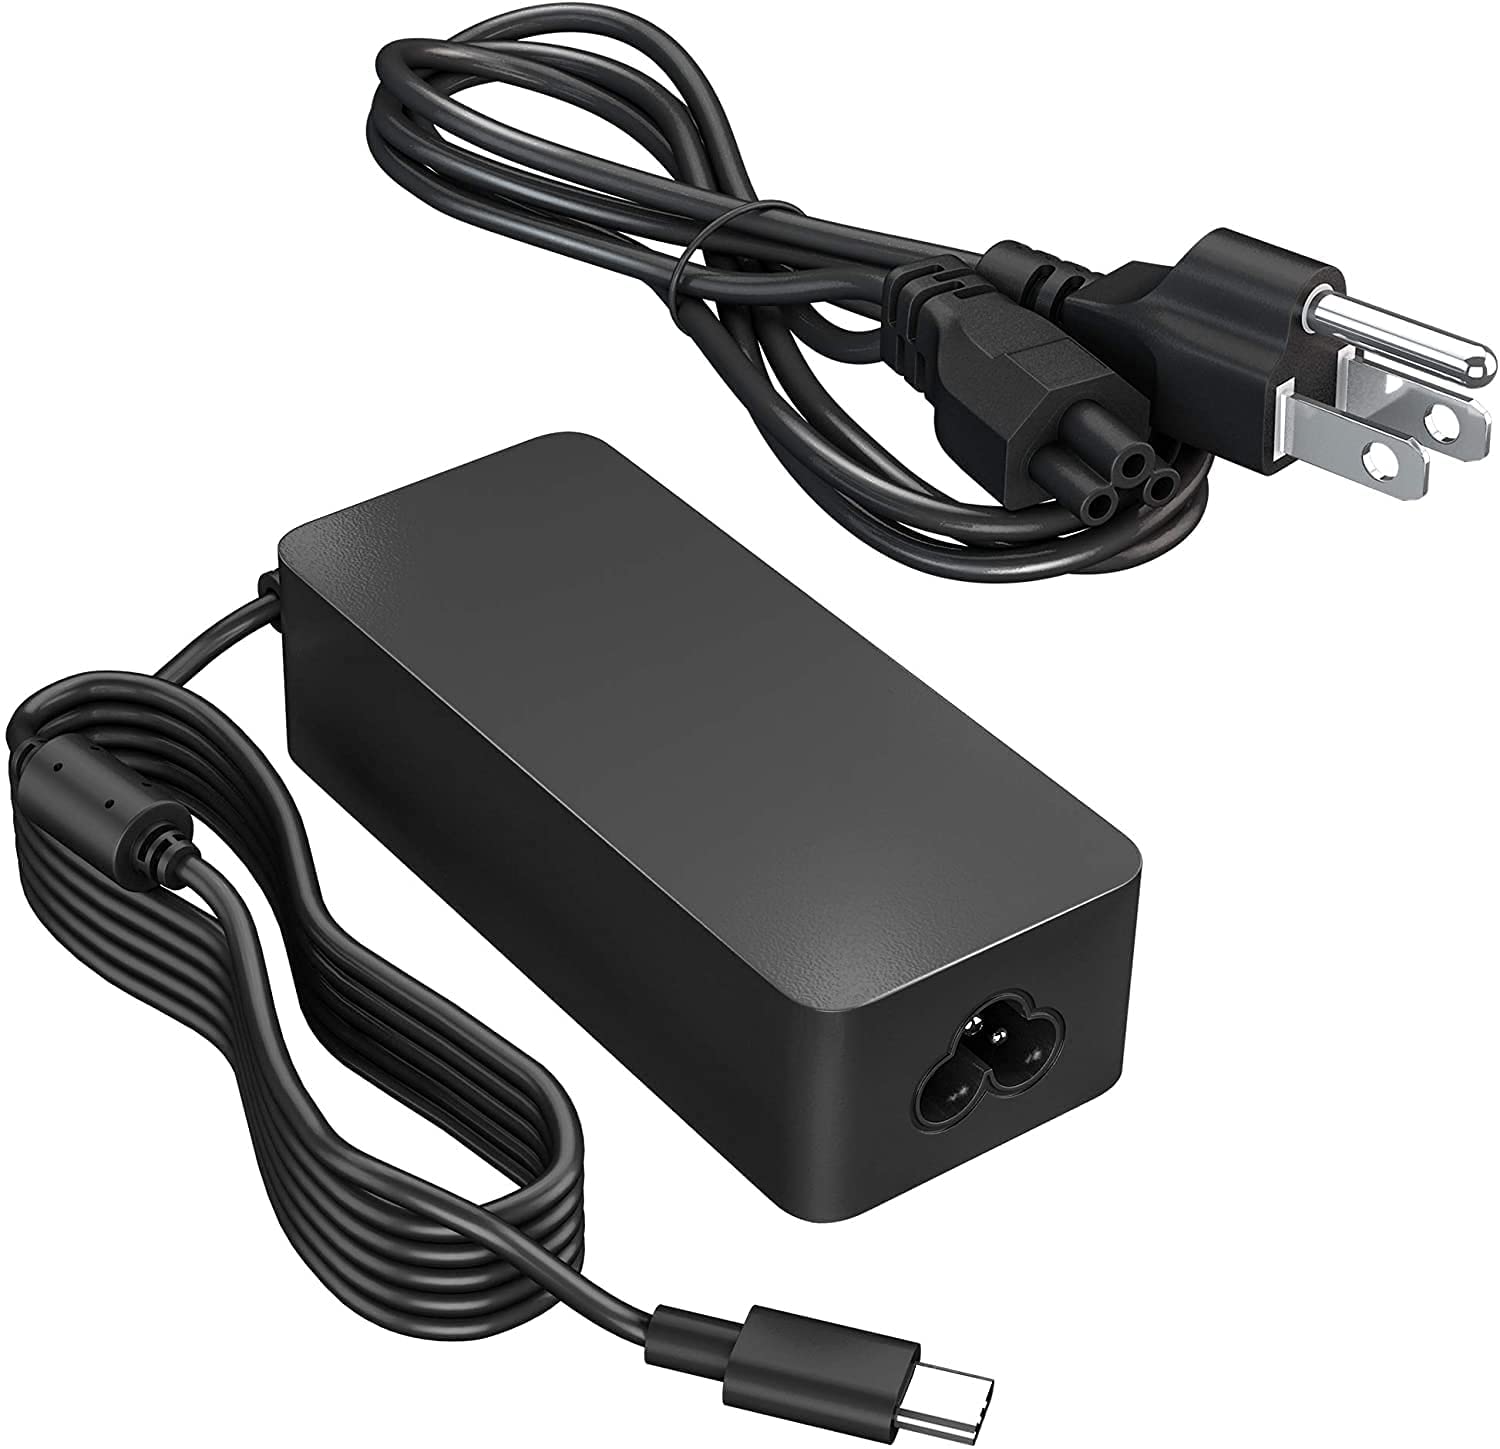 UNIVERSAL TYPE C LAPTOP CHARGER